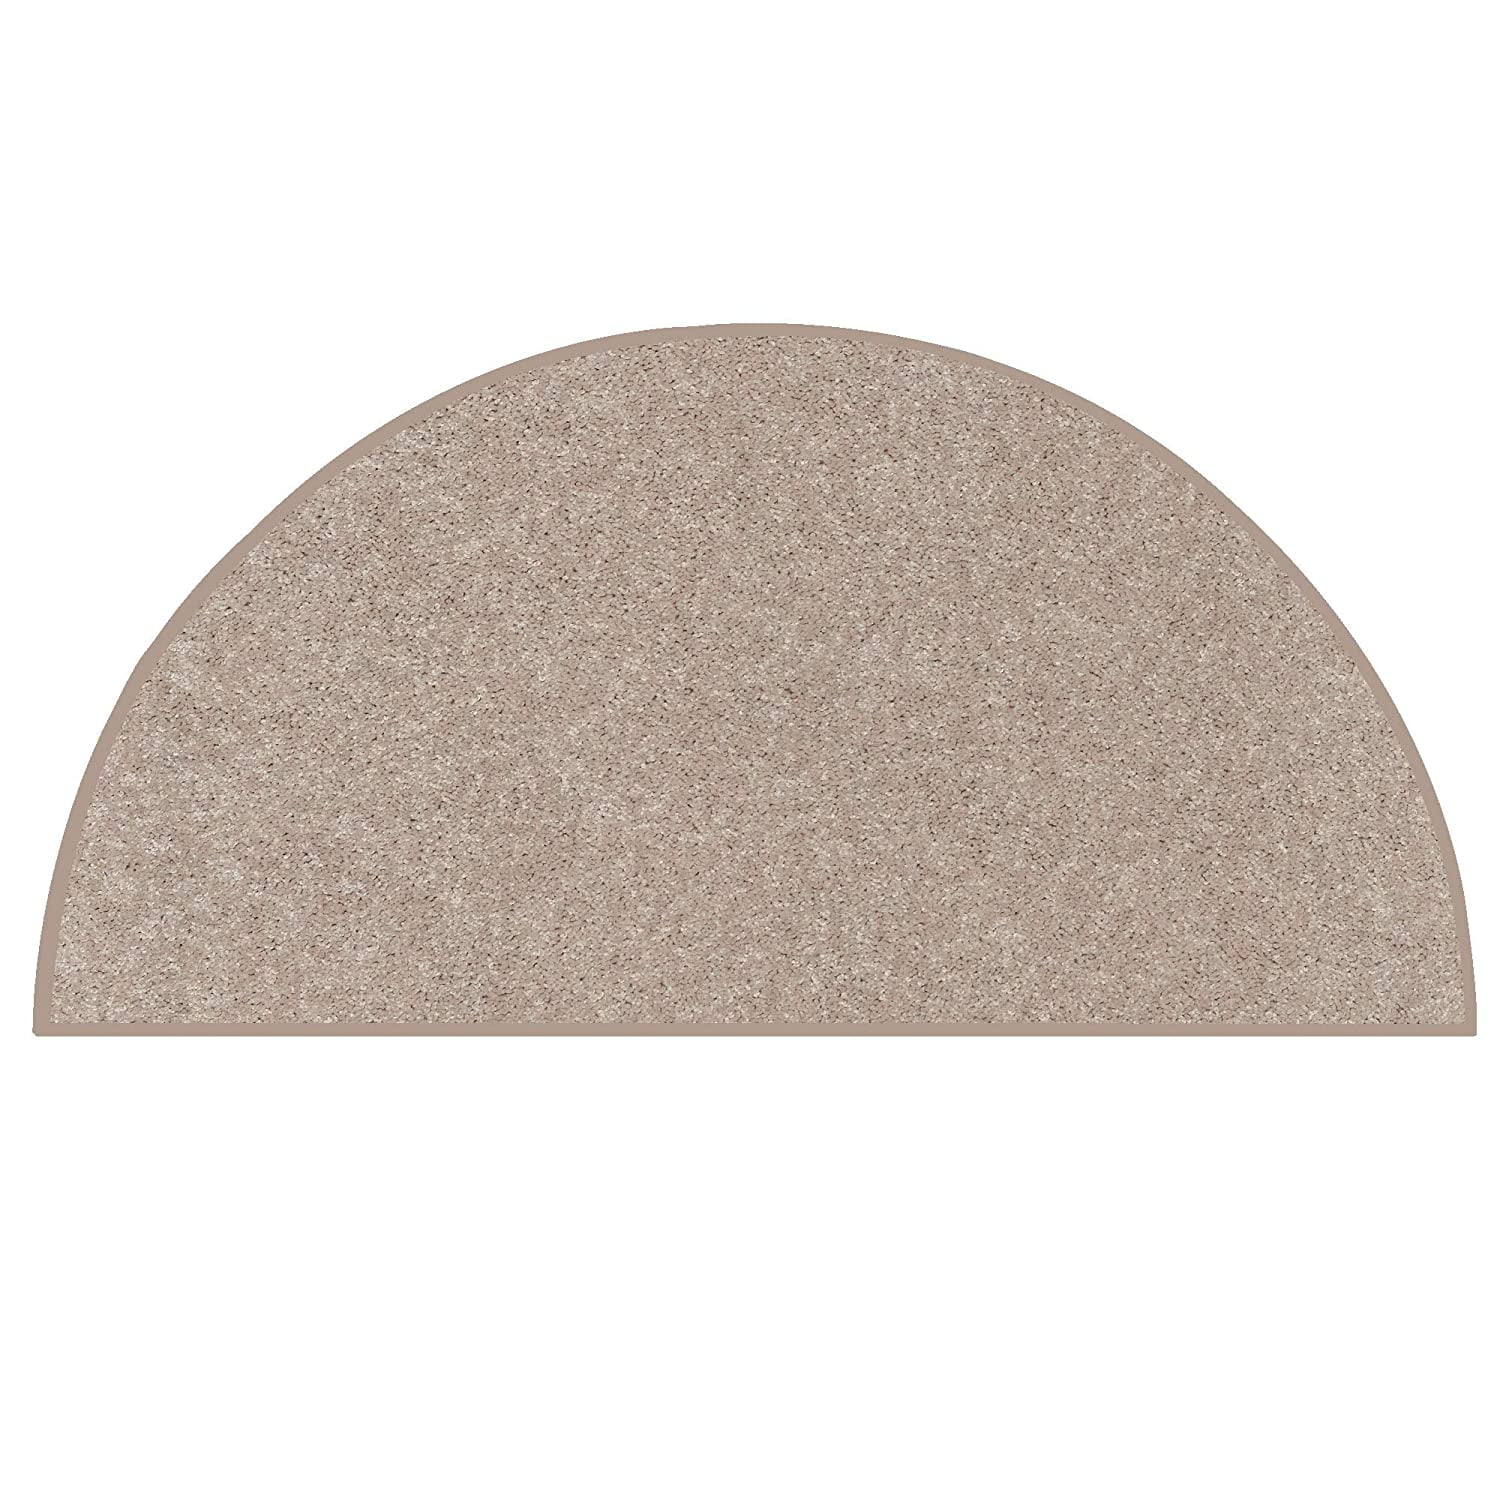 Ambiant Kids Solid Color Area Rugs Beige - 33" x 66" Half Round